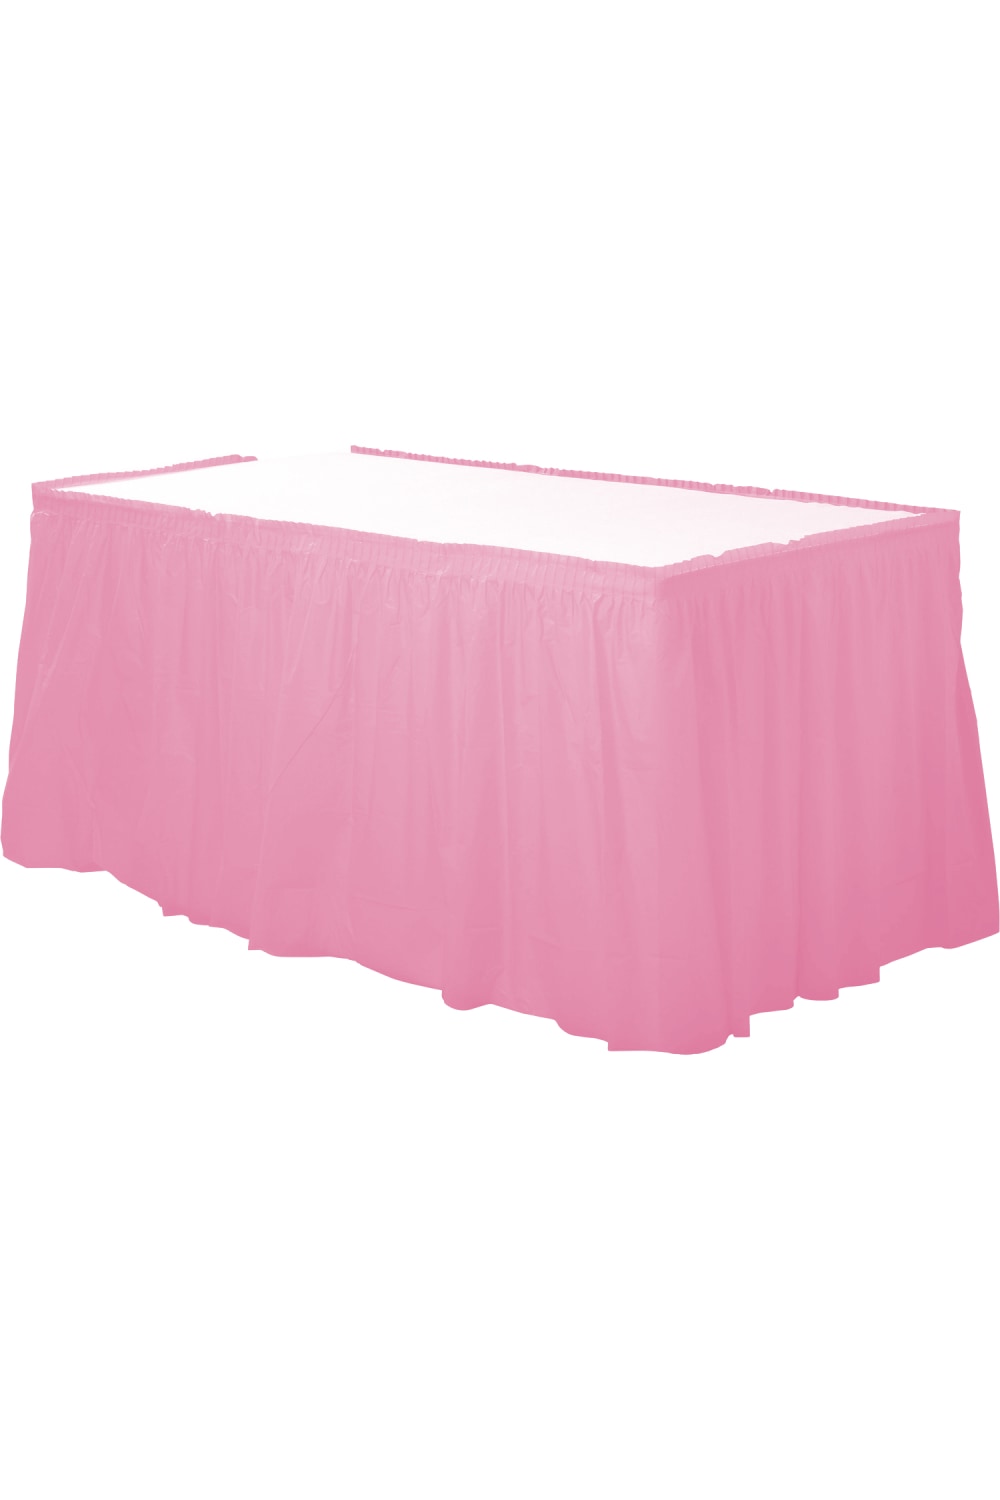 Amscan Rectangular Plastic Tablecover (Pack Of 12) (New Pink) (54 x 108in)